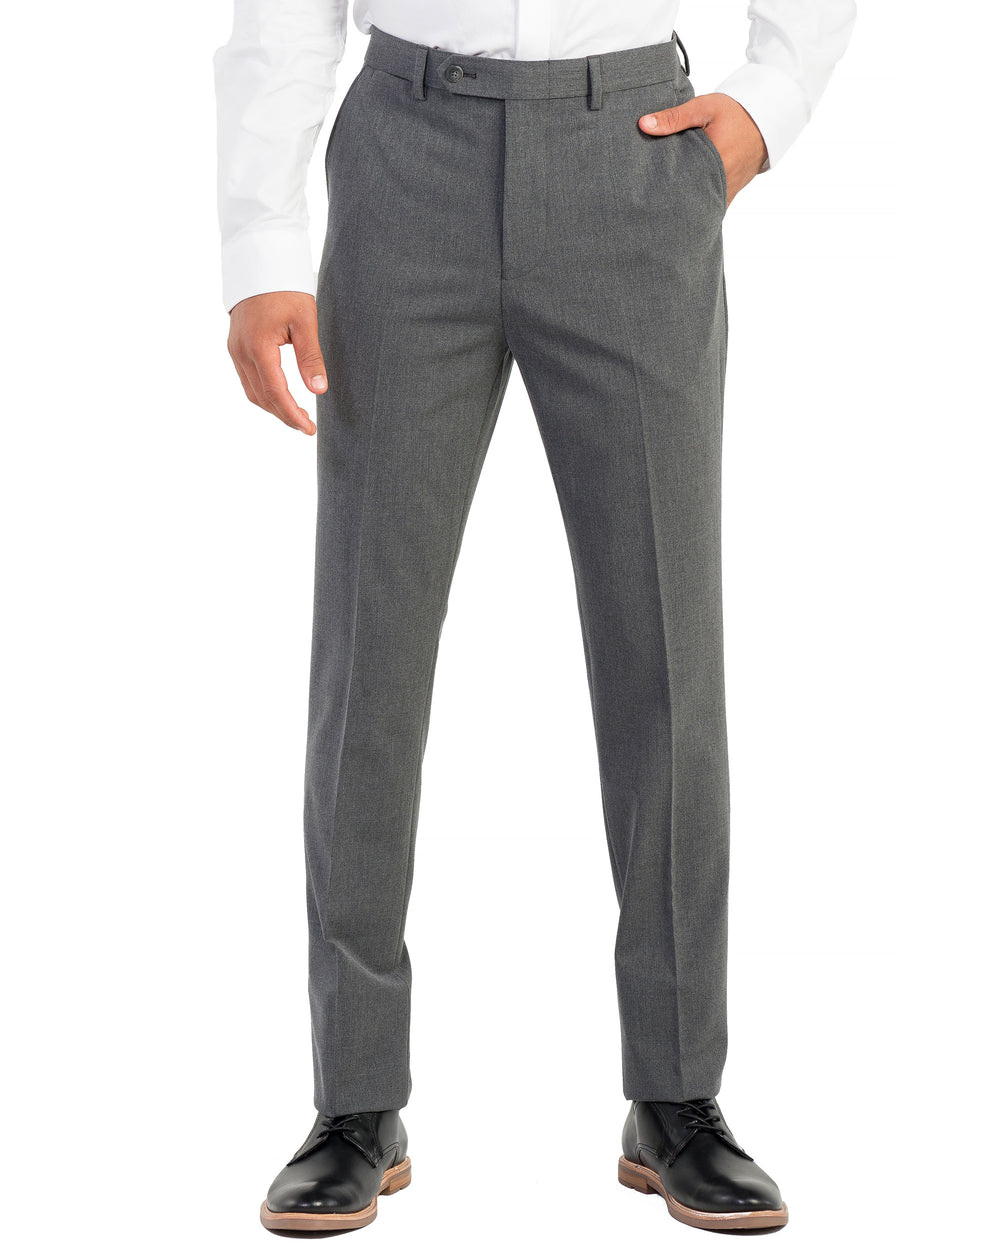 Bell Bi-Stretch Two-Button Side Vent Suit - Grey